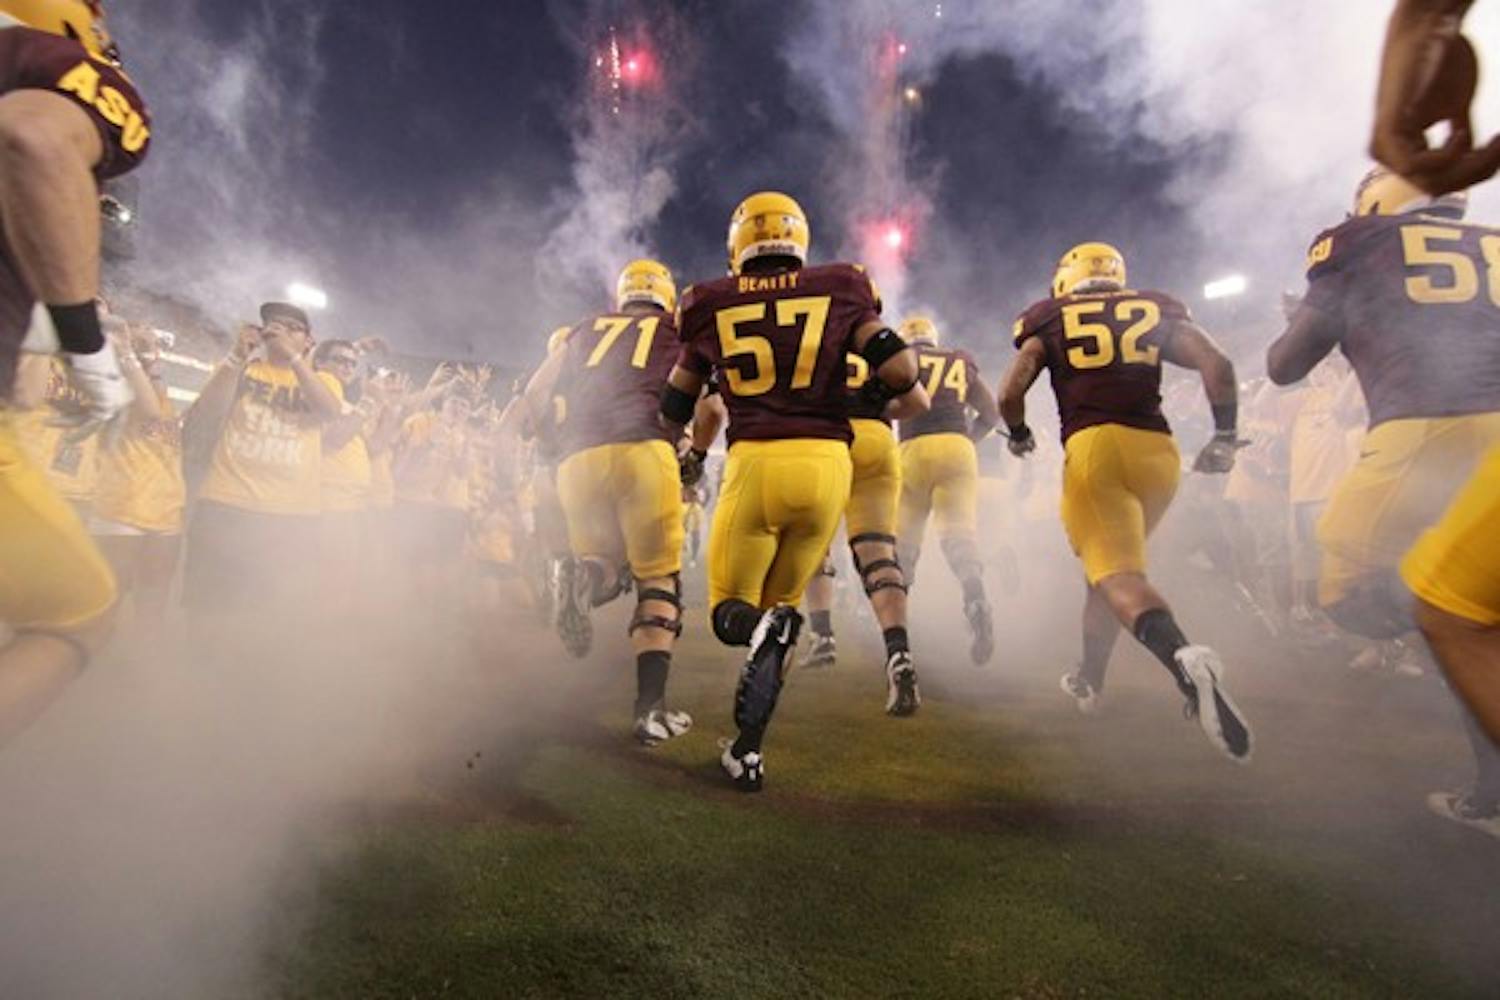 MYSTERY MEN: Members of the ASU football team’s offensive line walk off the field at practice Tuesday. With the exceptions of juniors Dan Knapp and Garth Gerhart, little is resolved about the group that will start on the offensive line Saturday against Portland State. (Photo by Aaron Lavinsky) 